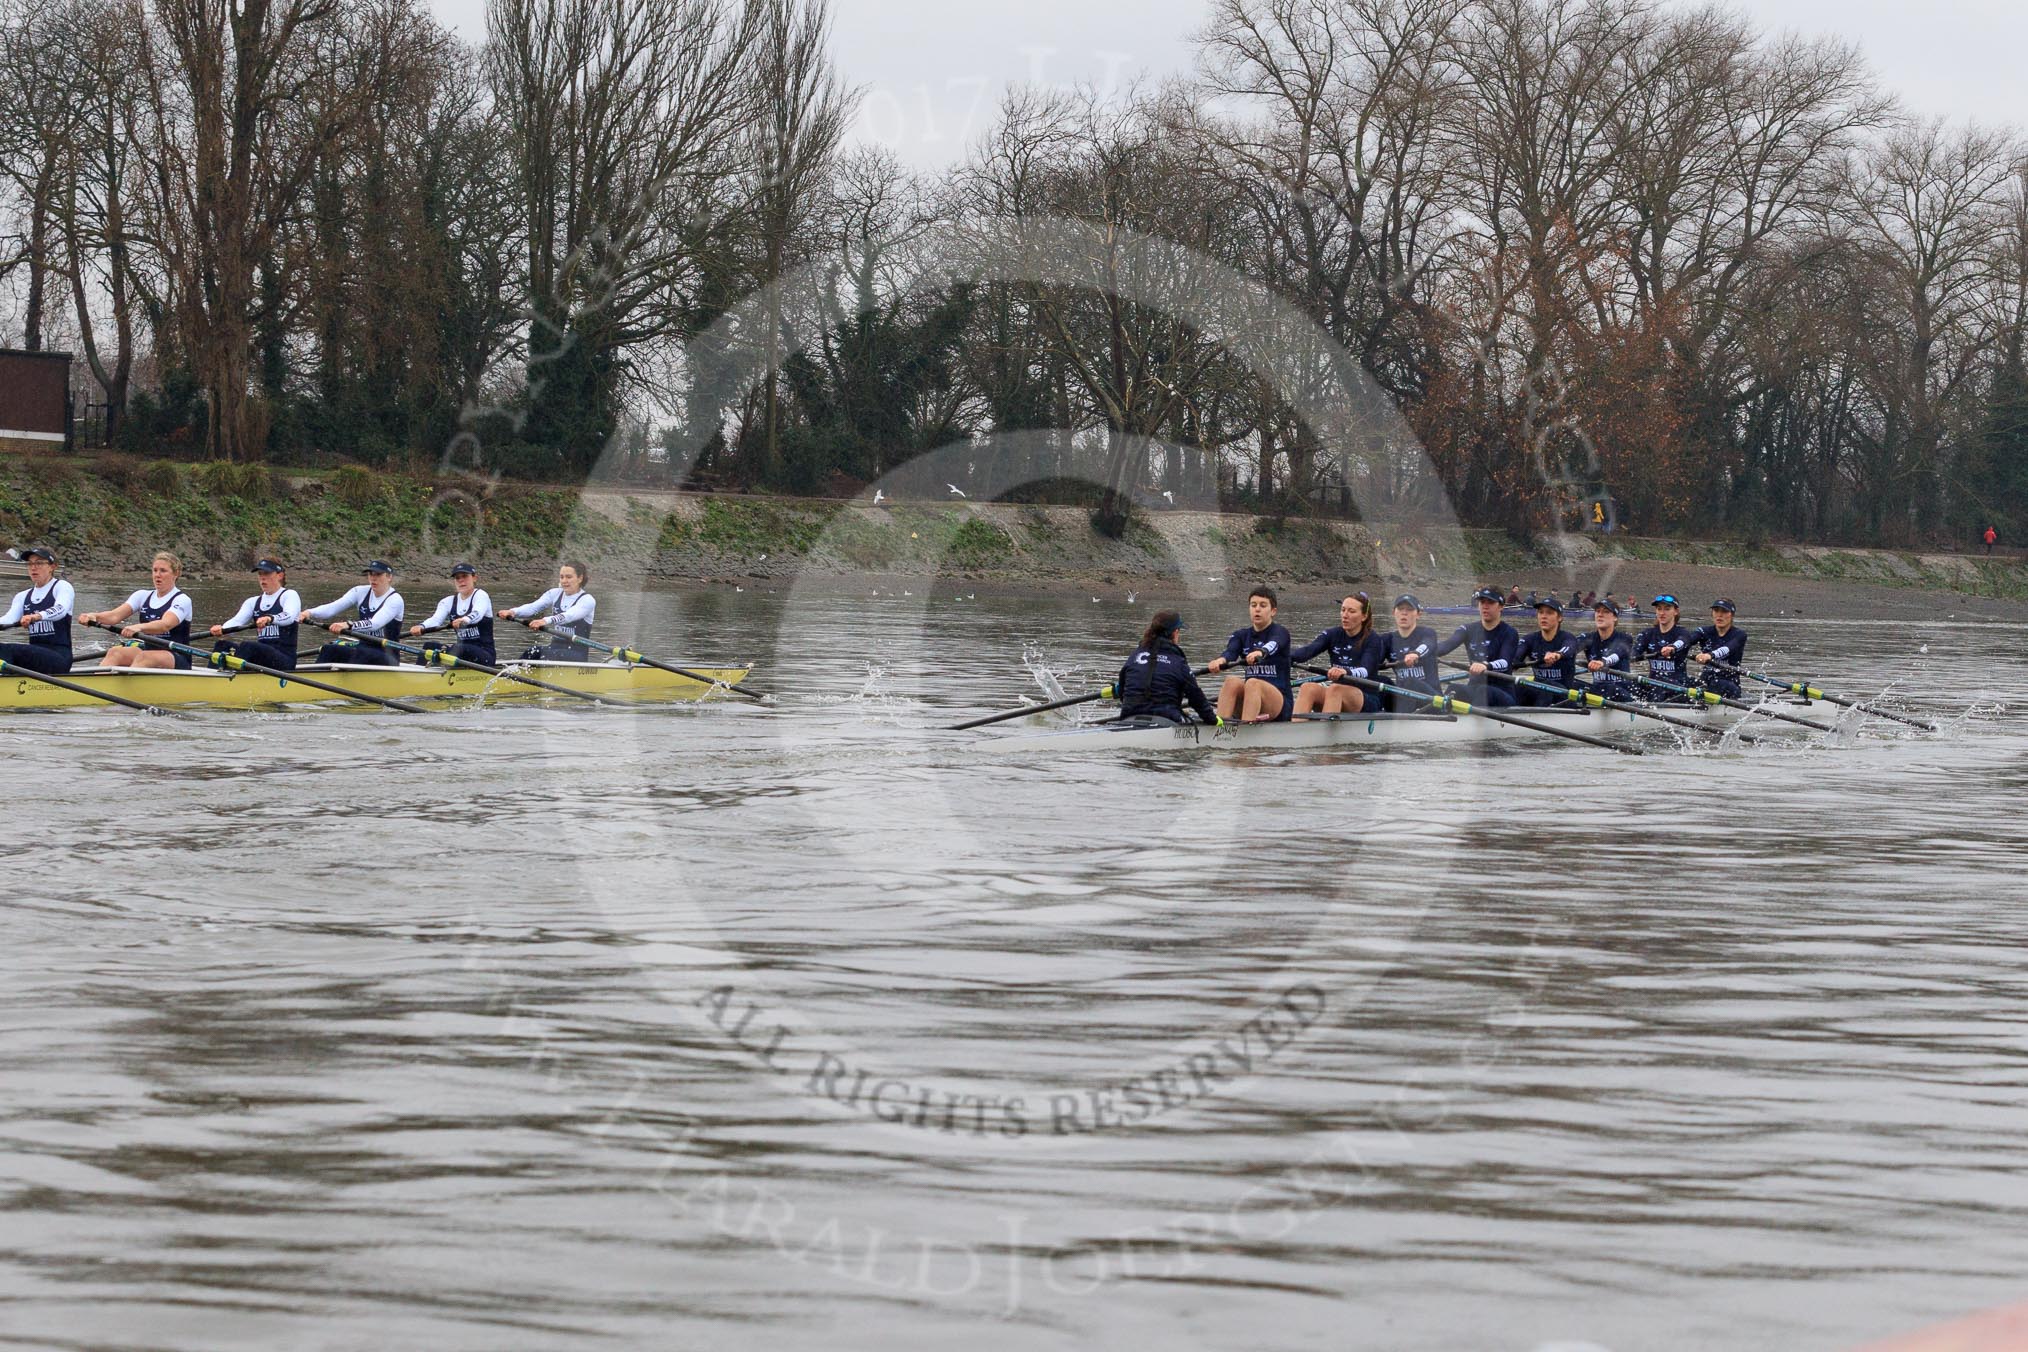 The Boat Race season 2018 - Women's Boat Race Trial Eights (OUWBC, Oxford): "Coursing River" and "Great Typhoon" after passing the boat houses on Putney Embankment.
River Thames between Putney Bridge and Mortlake,
London SW15,

United Kingdom,
on 21 January 2018 at 14:30, image #75